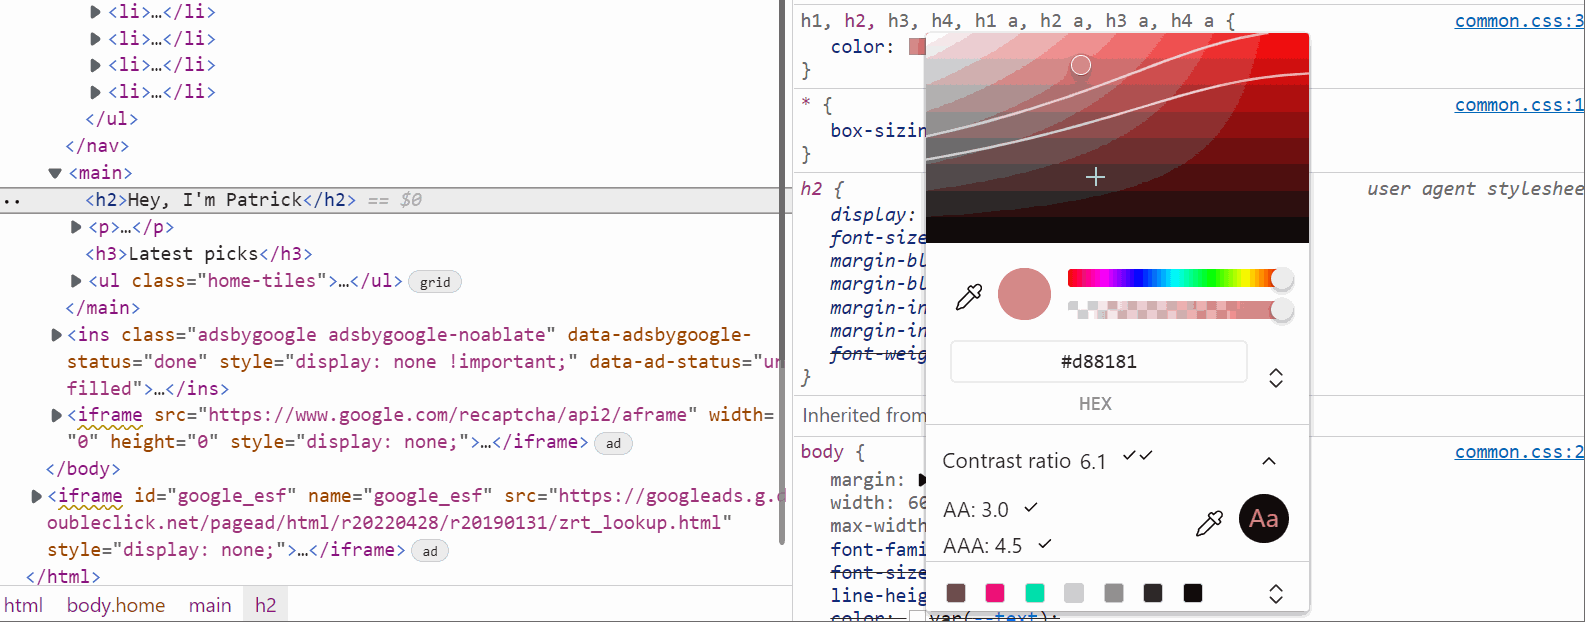 Screencast showing the color picker in the Styles pane, with the 2 guide lines to choose a color that has enough contrast. Moving the current color selection across those 2 lines recalculates the ratio in real time.